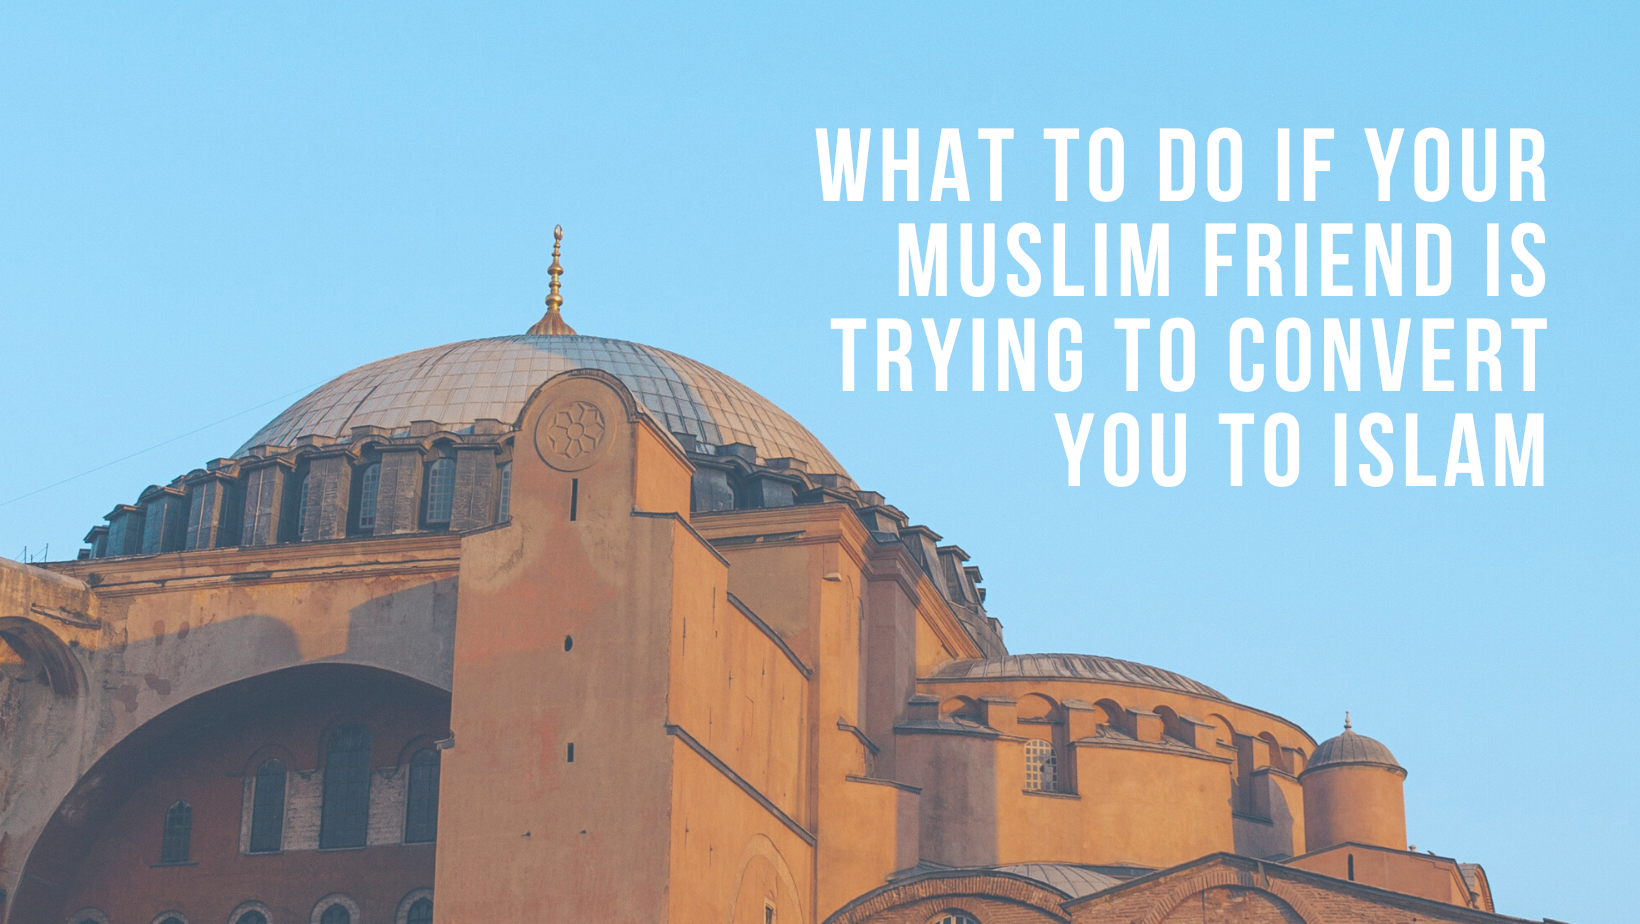 What to do if your Muslim friend is trying to convert you to Islam